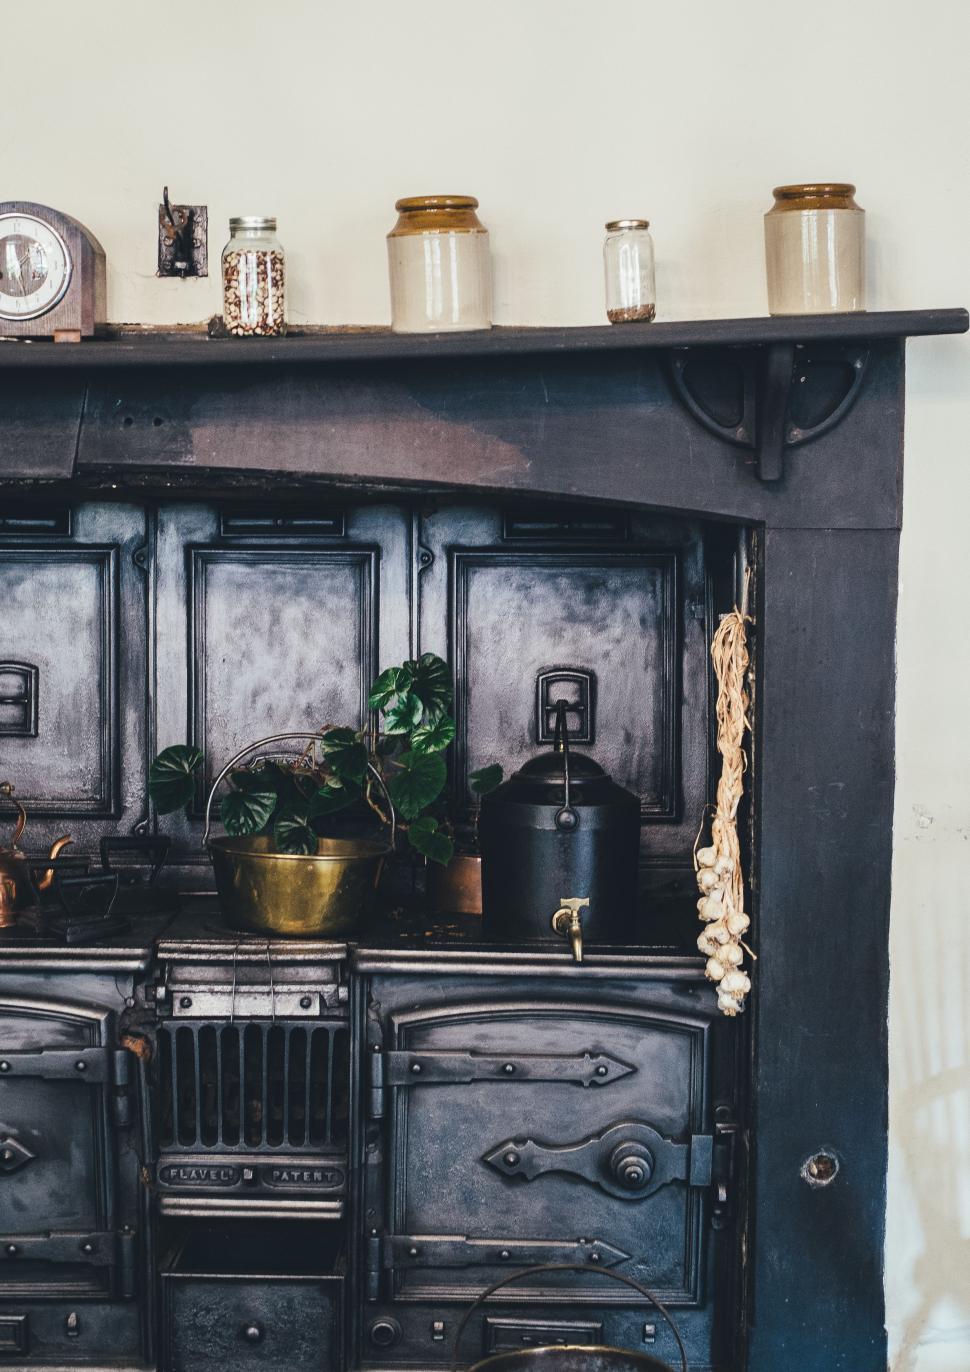 Free Image of Vintage Stove With Pots and Pans 